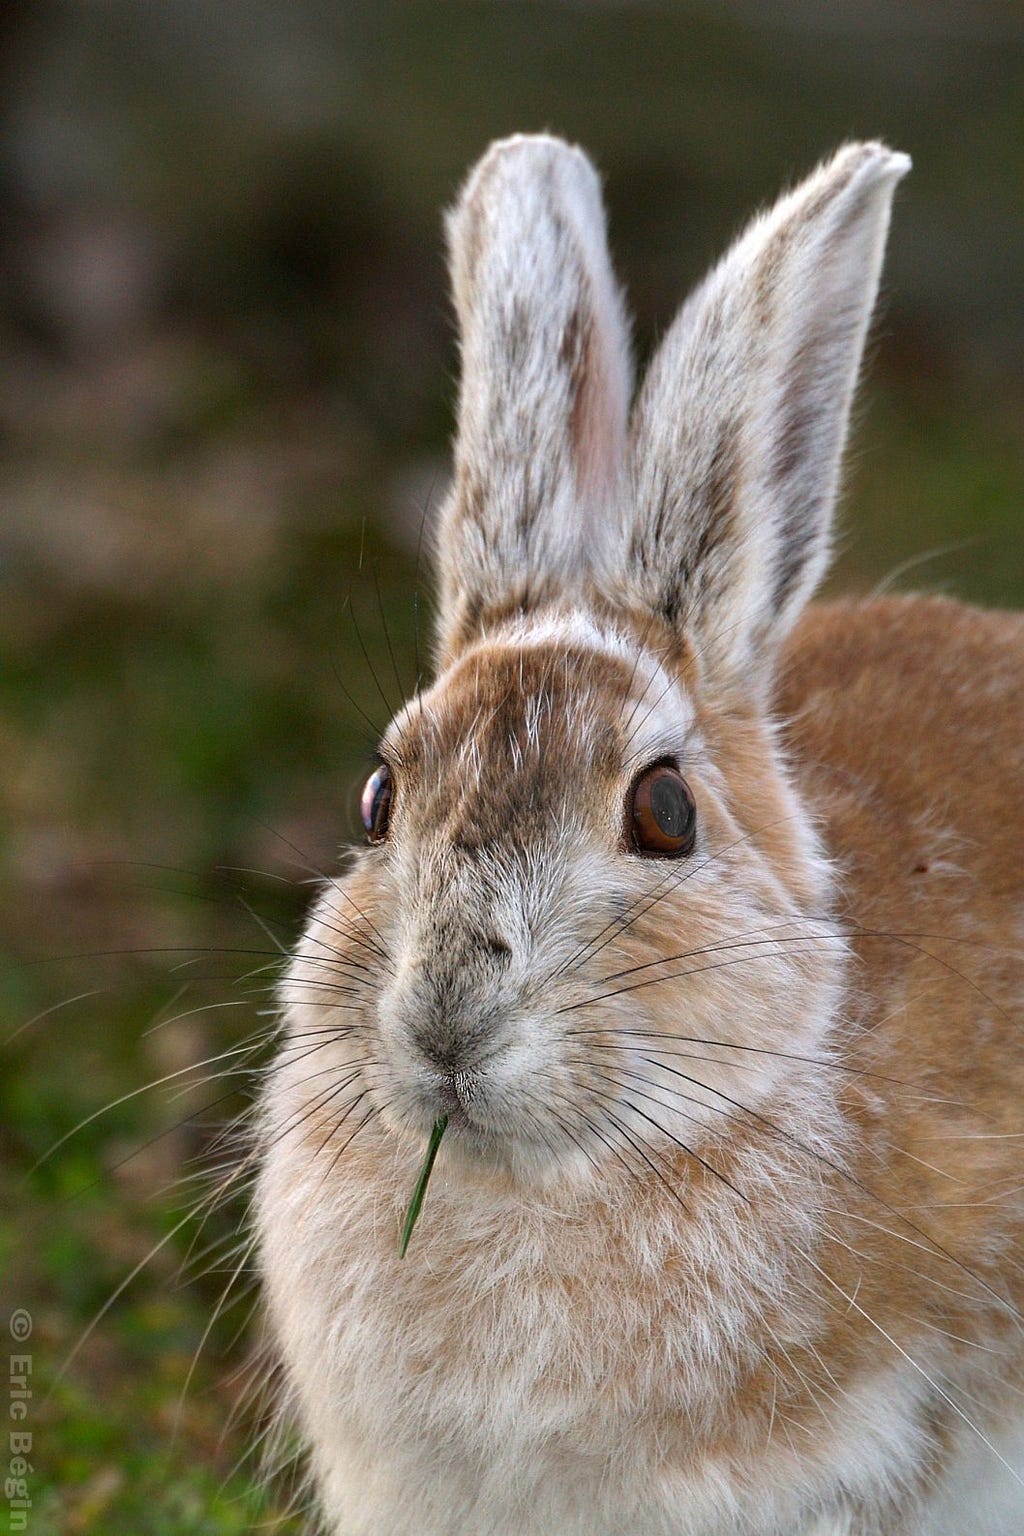 Mostly brown snowshoe hare with white fur around face and ears sits in green grass. A piece of grass hangs out of its mouth.